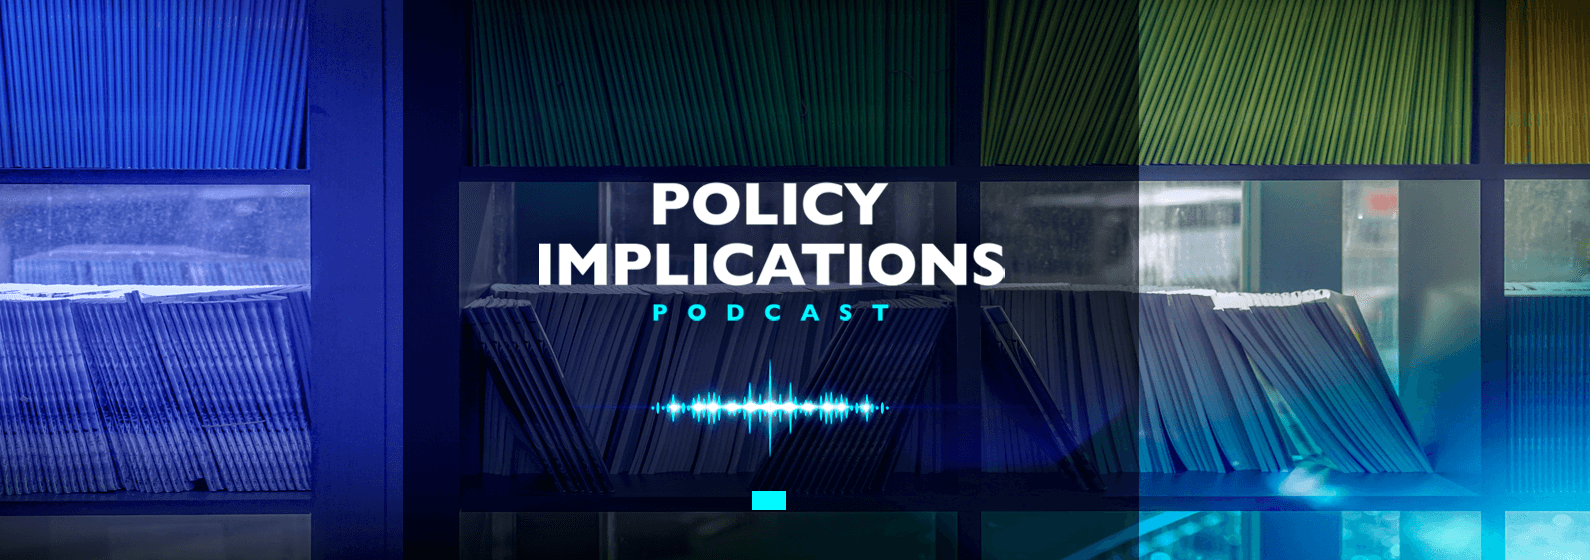 Policy implications podcast